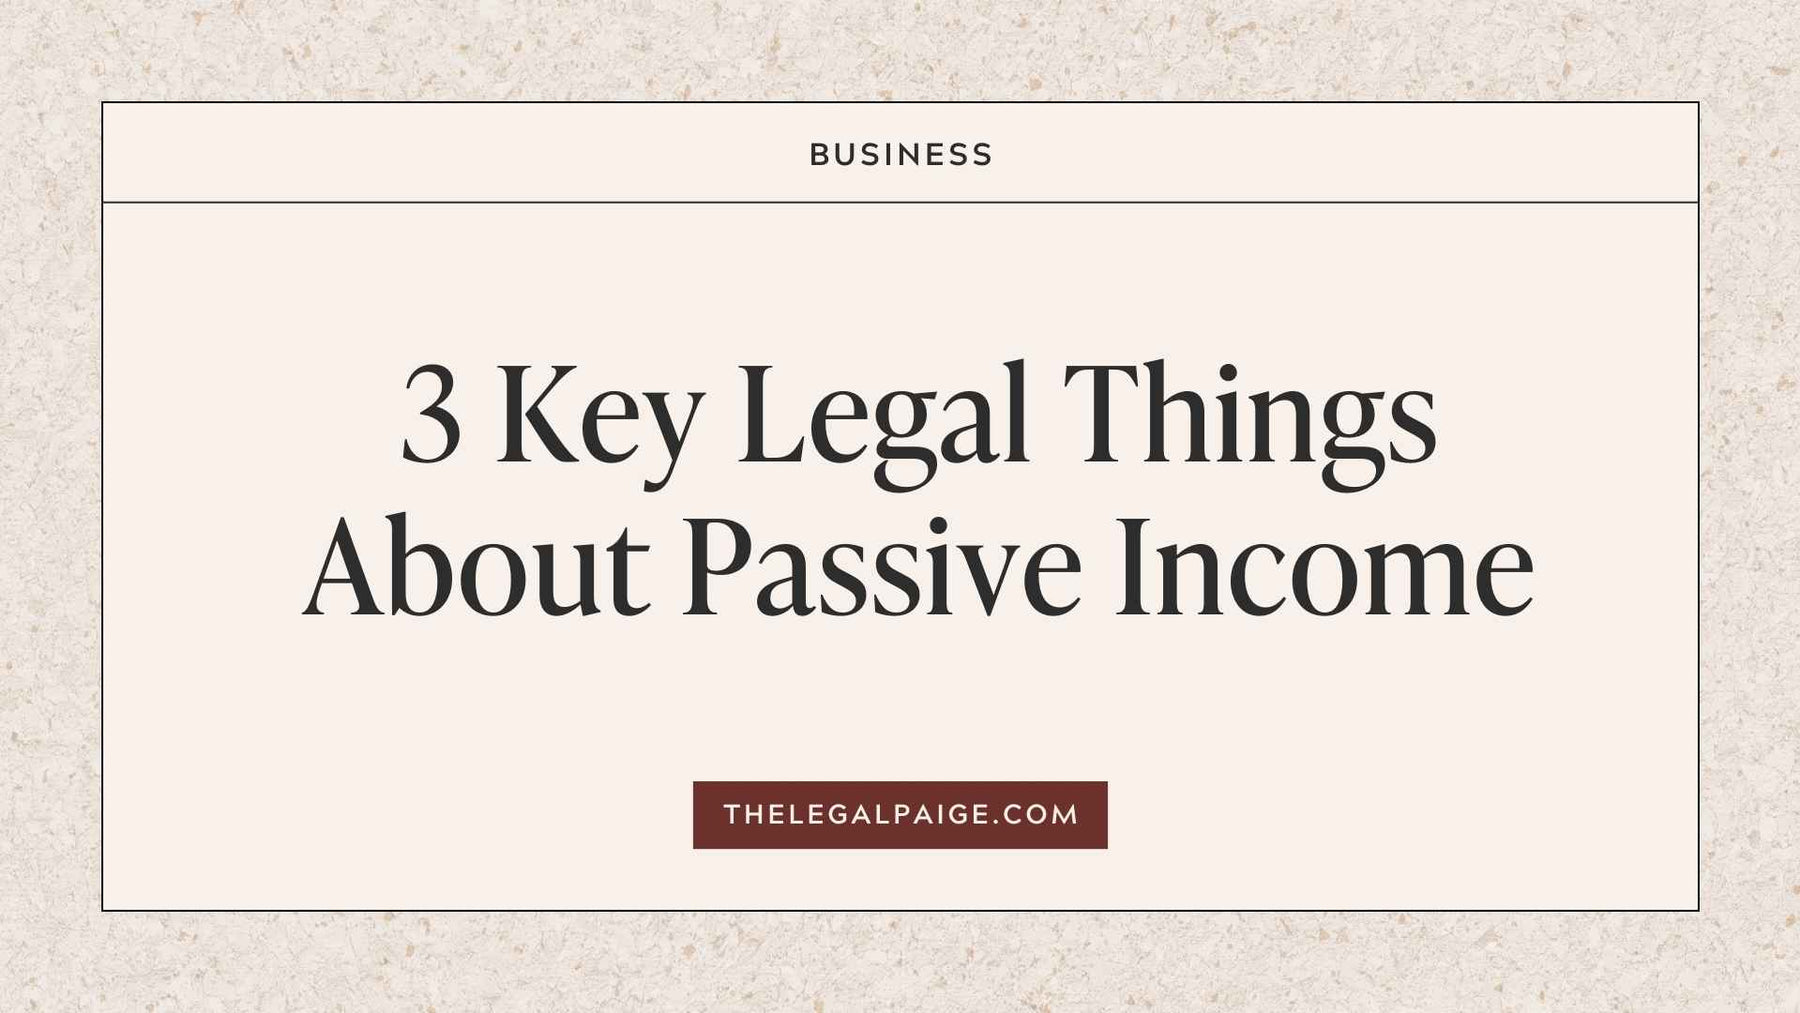 3 Key Legal Things About Passive Income